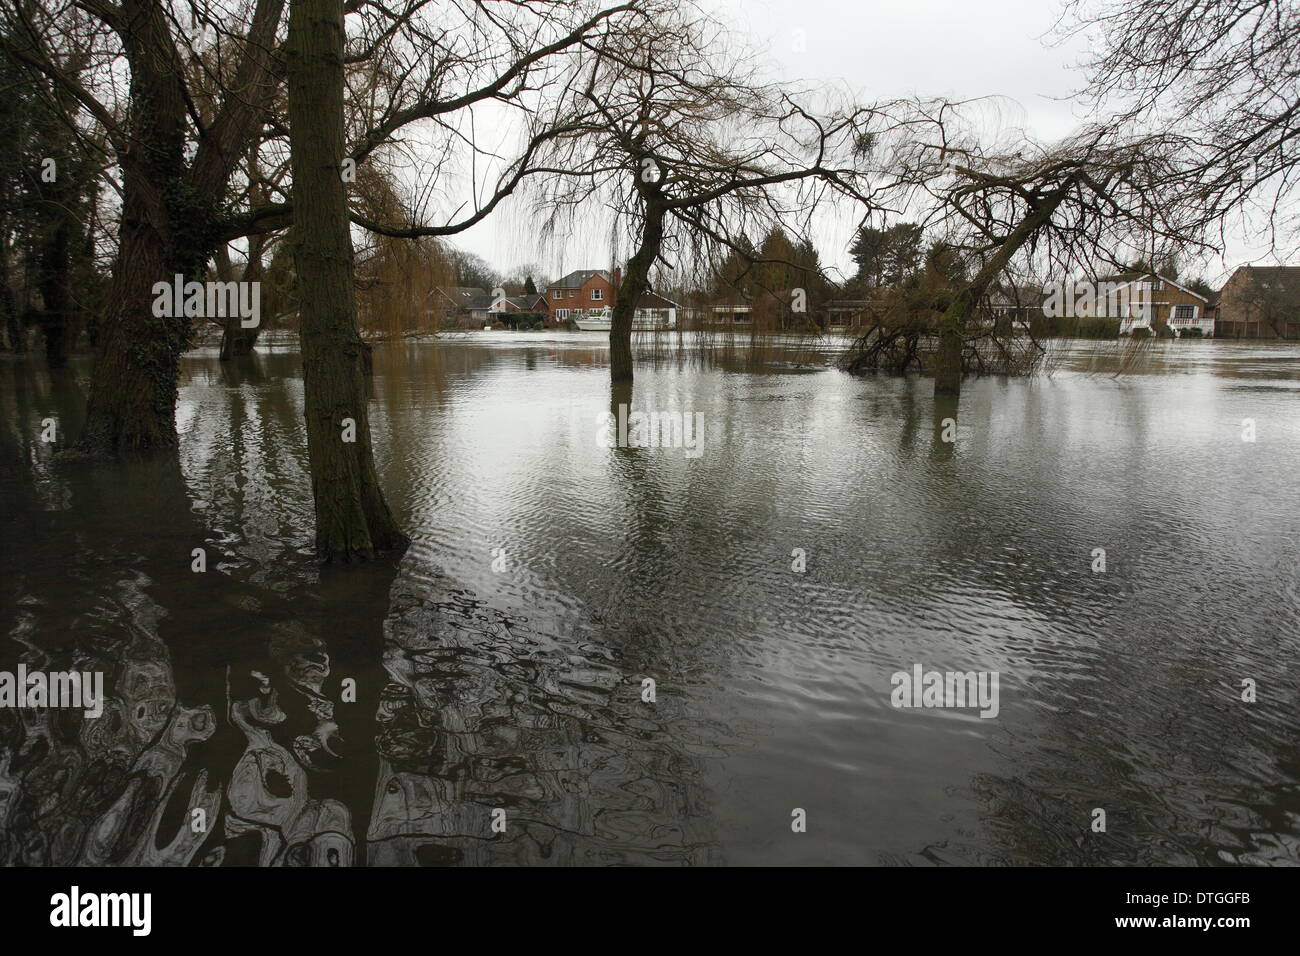 Thames Valley, UK . 17th Feb, 2014. Flooded homes on the banks of the river Thames near Staines. Flood waters remain high after last weeks flooding across the Thames valley. Credit:  Zute Lightfoot/Alamy Live News Stock Photo